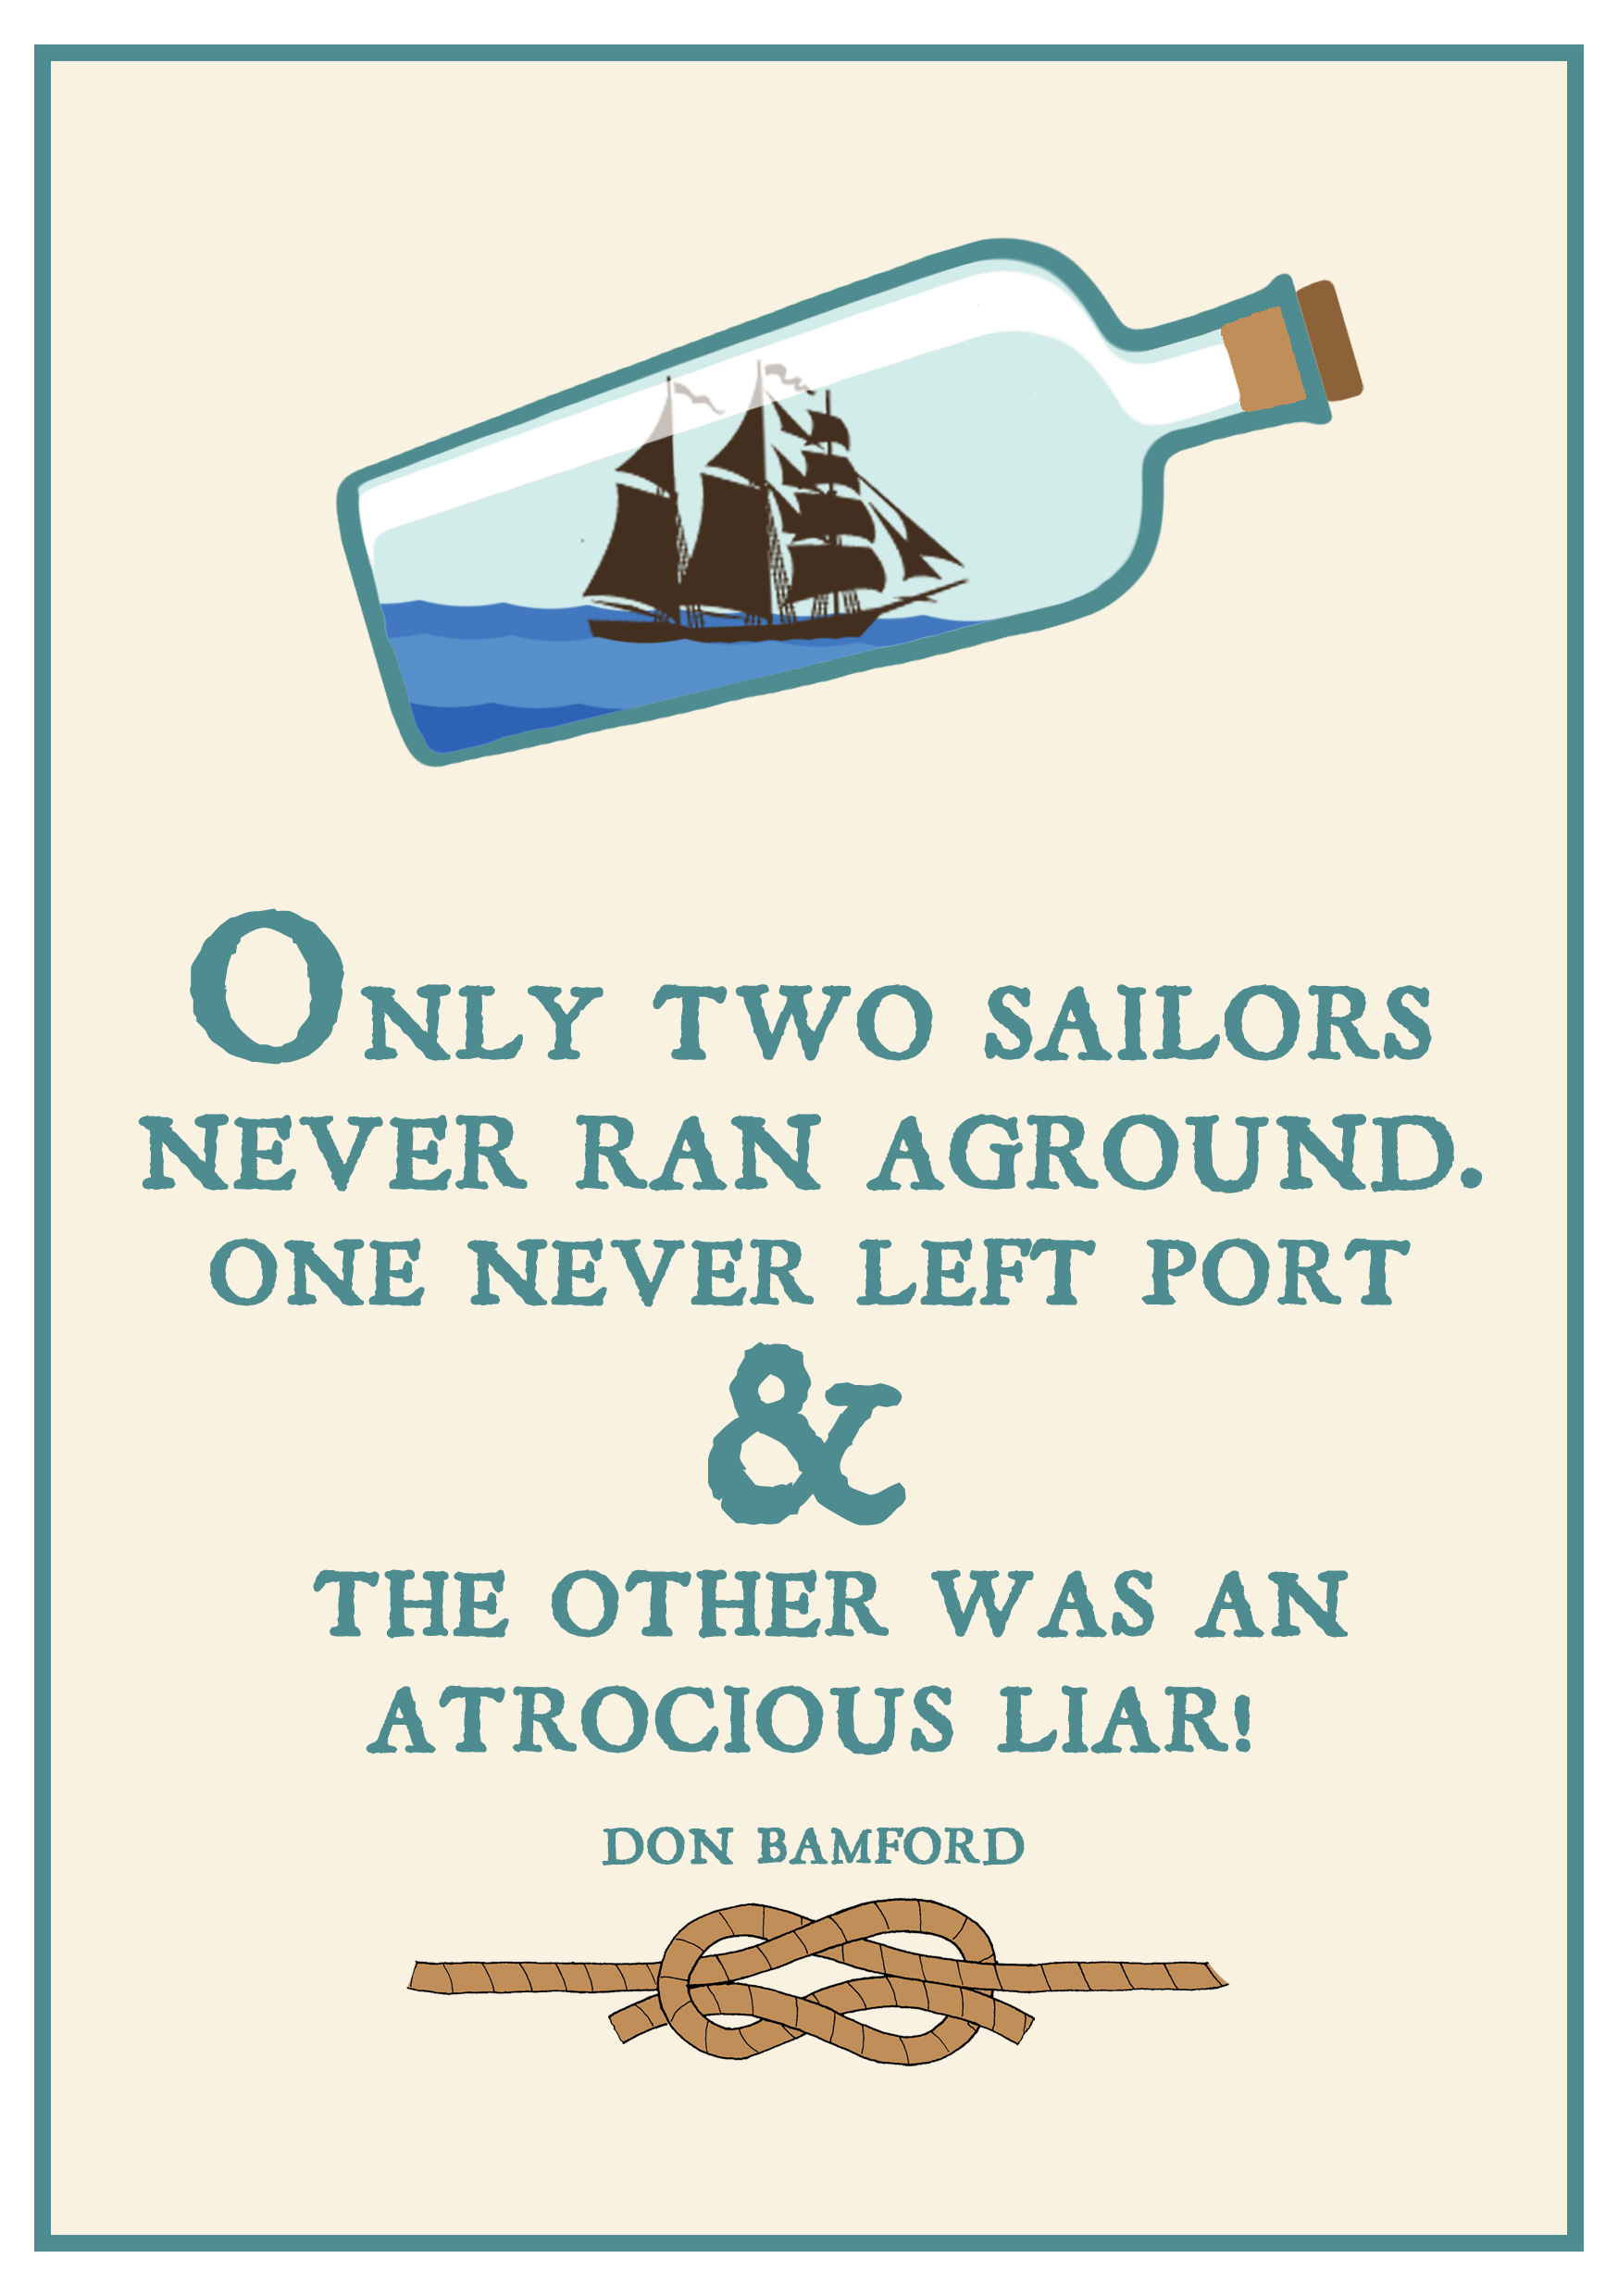 Tag Archives: Sailing quotes